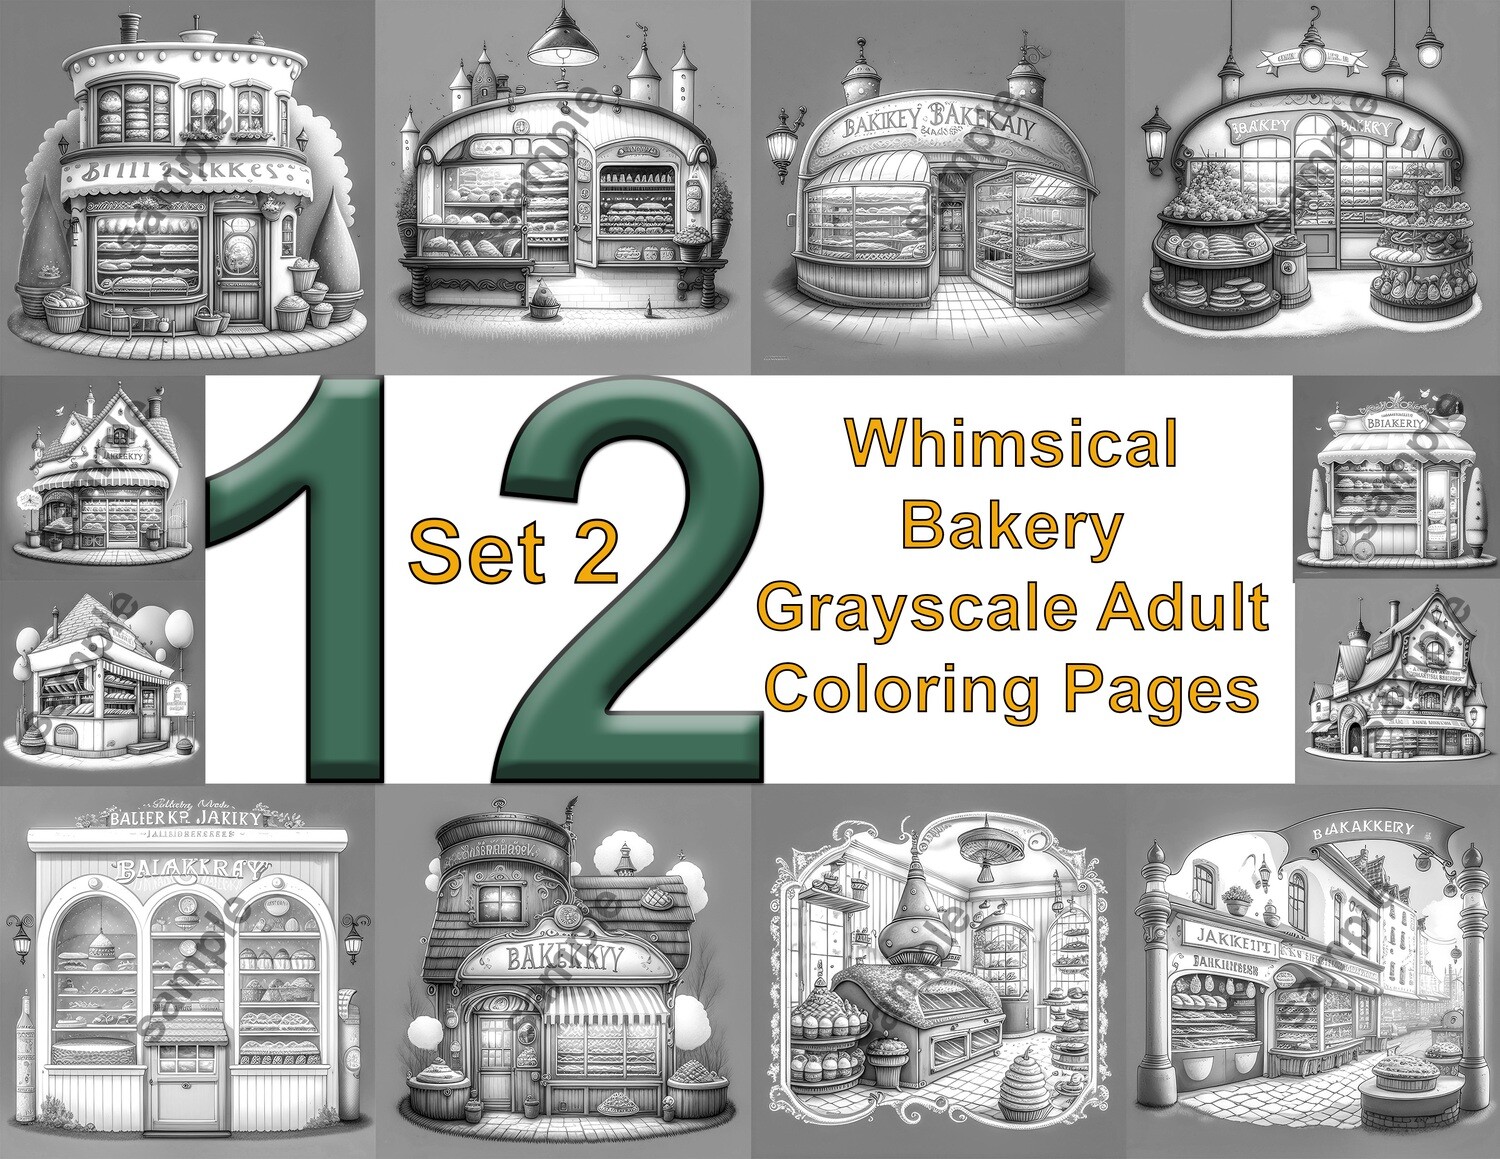 Whimsical Bakery Grayscale Adult Coloring Pages 12 pack Set 2